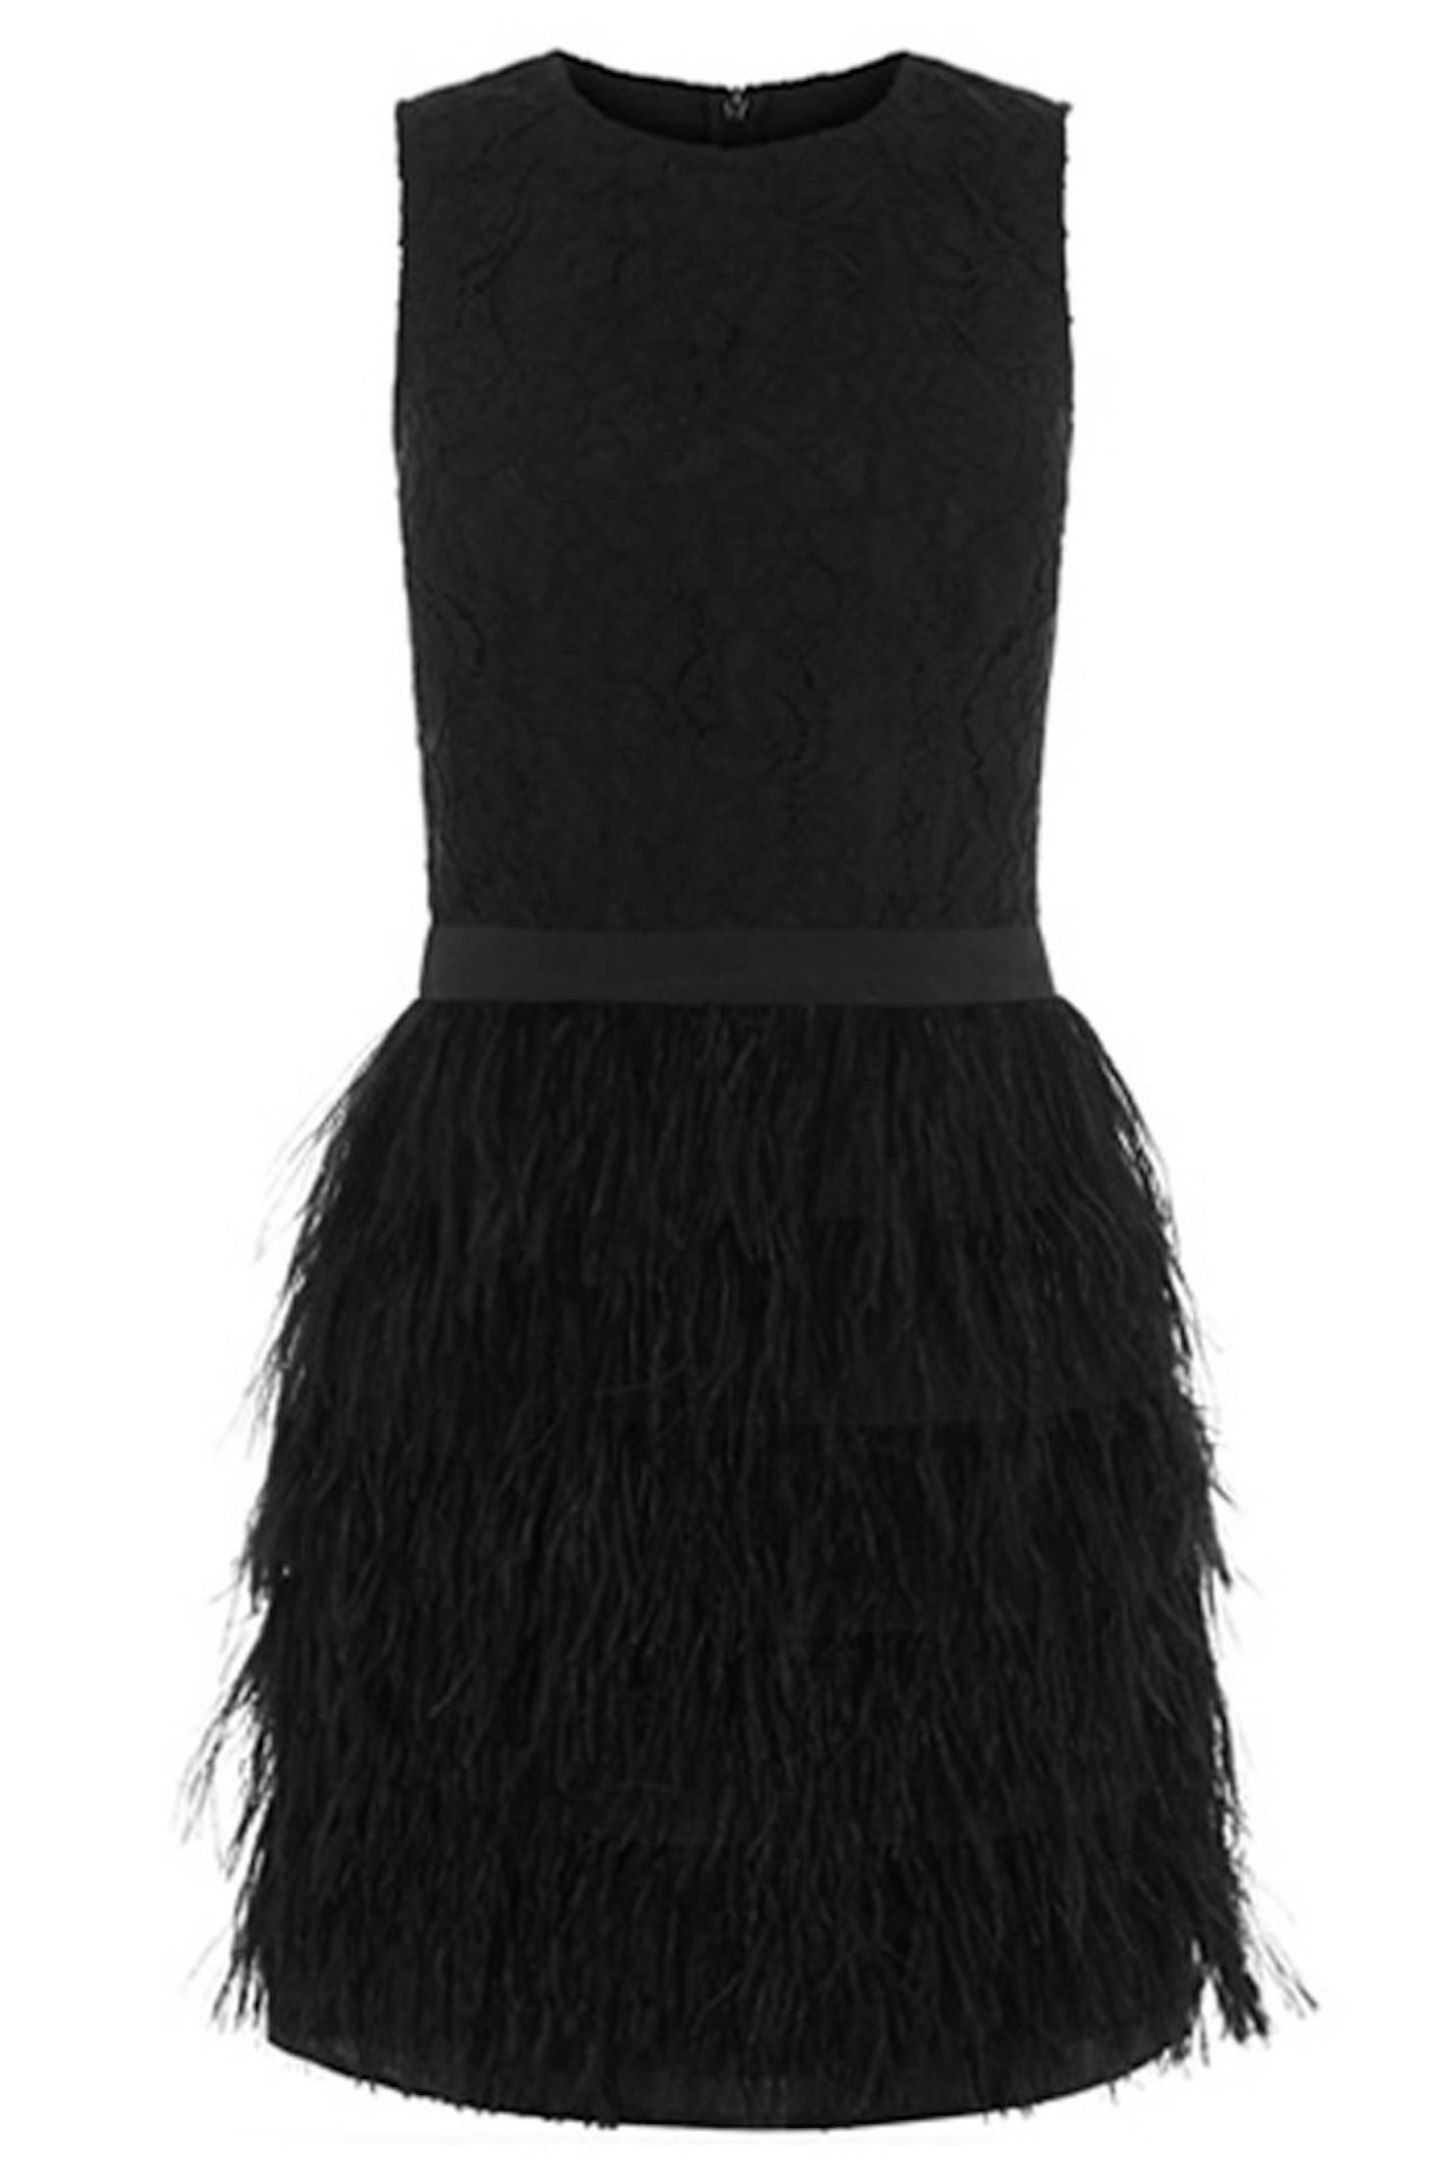 27. Black lace feather dress, £130, Oasis